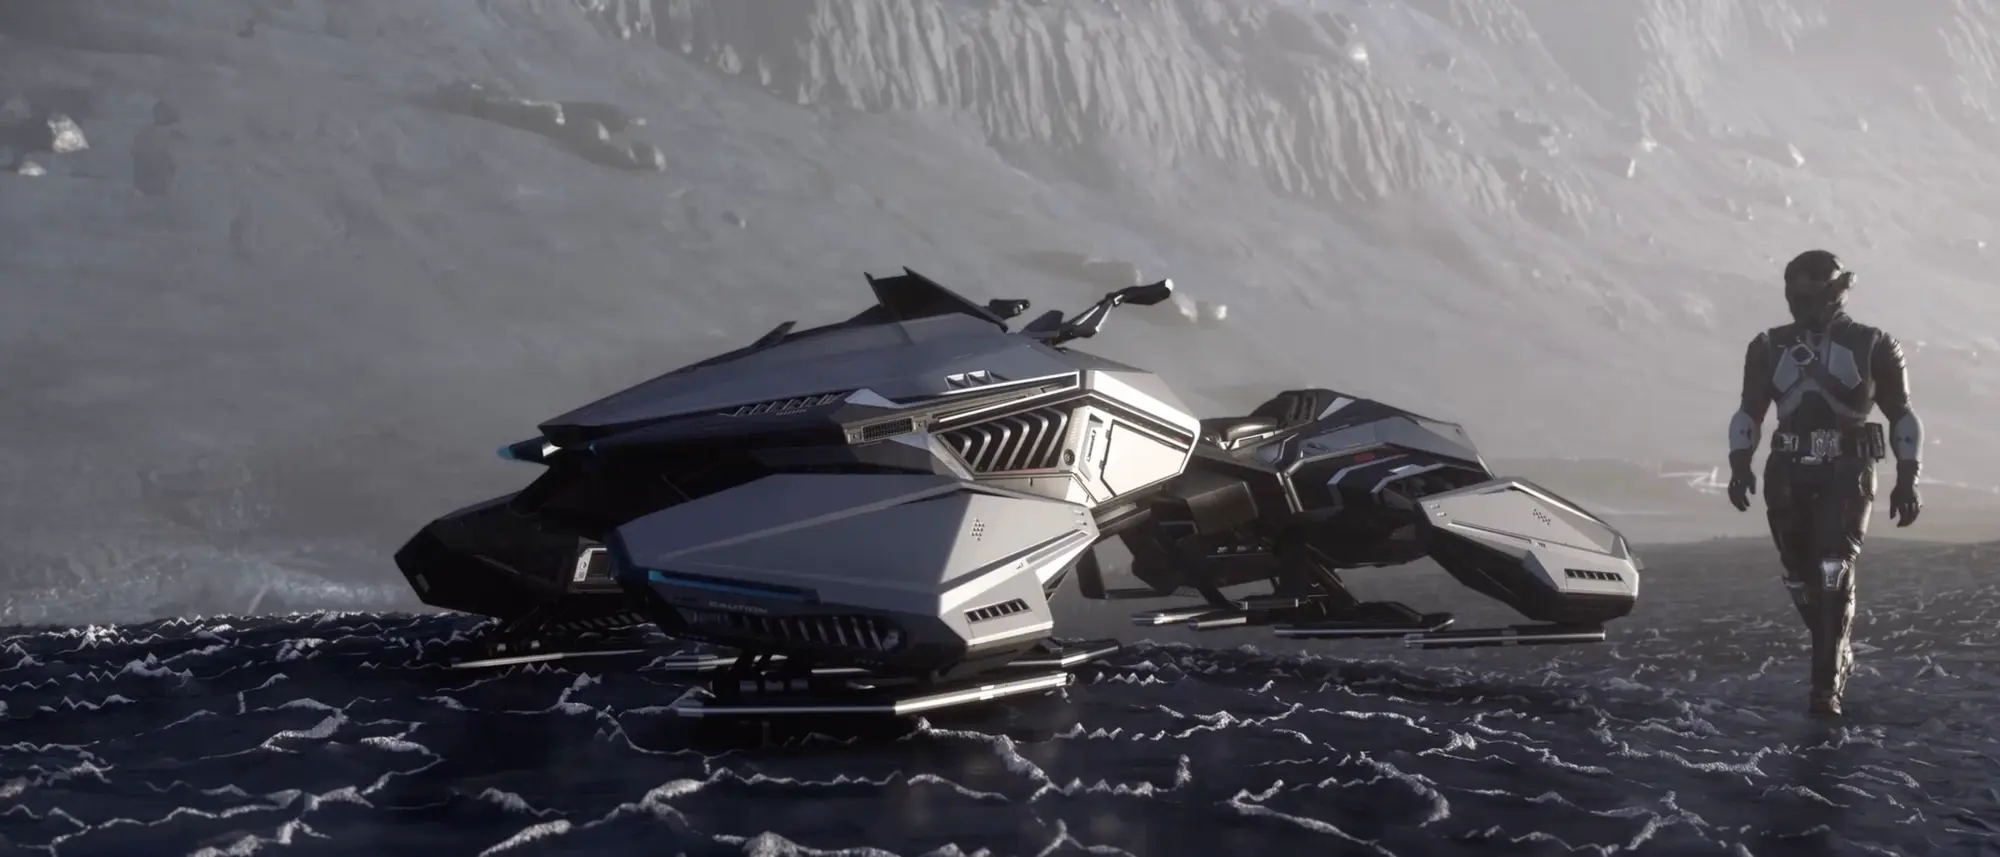 Star Citizen will let you fly over 100 ships freely for the next 2 weeks